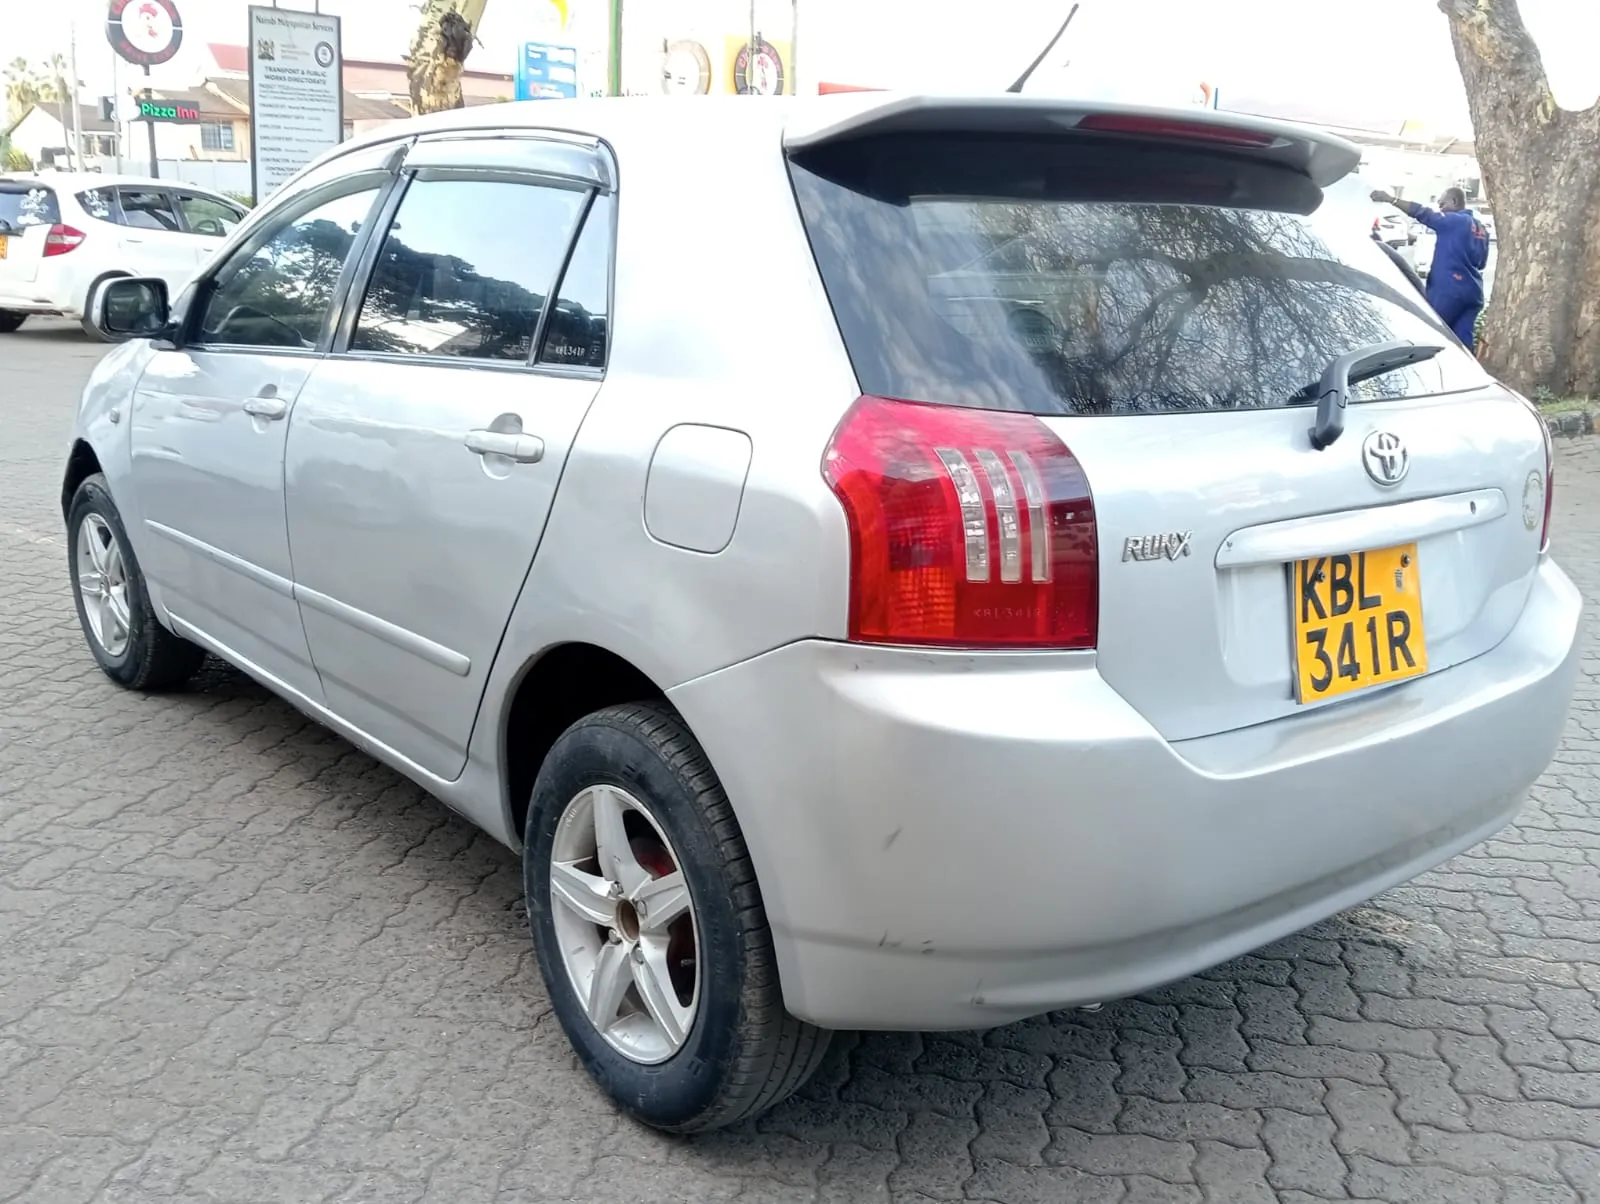 toyota RUNX Allex for sale as new hire purchase installments